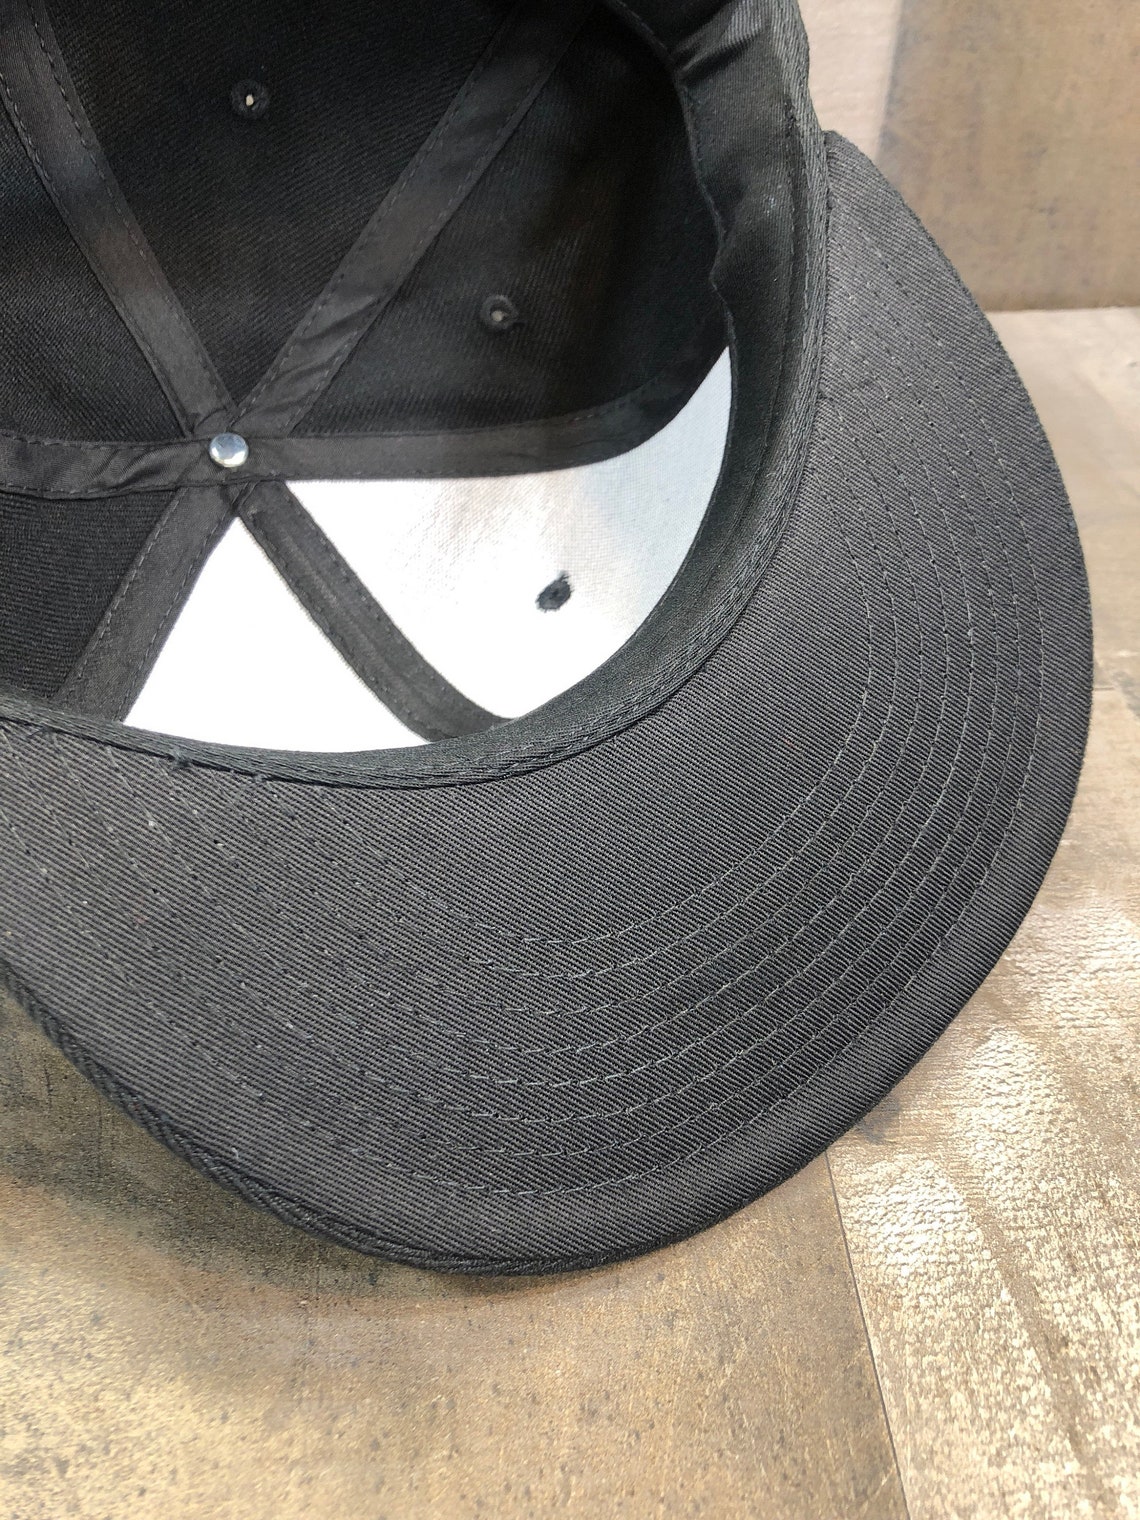 Airbrushed Viper snake Snapback Hat Hand Painted airbrush | Etsy